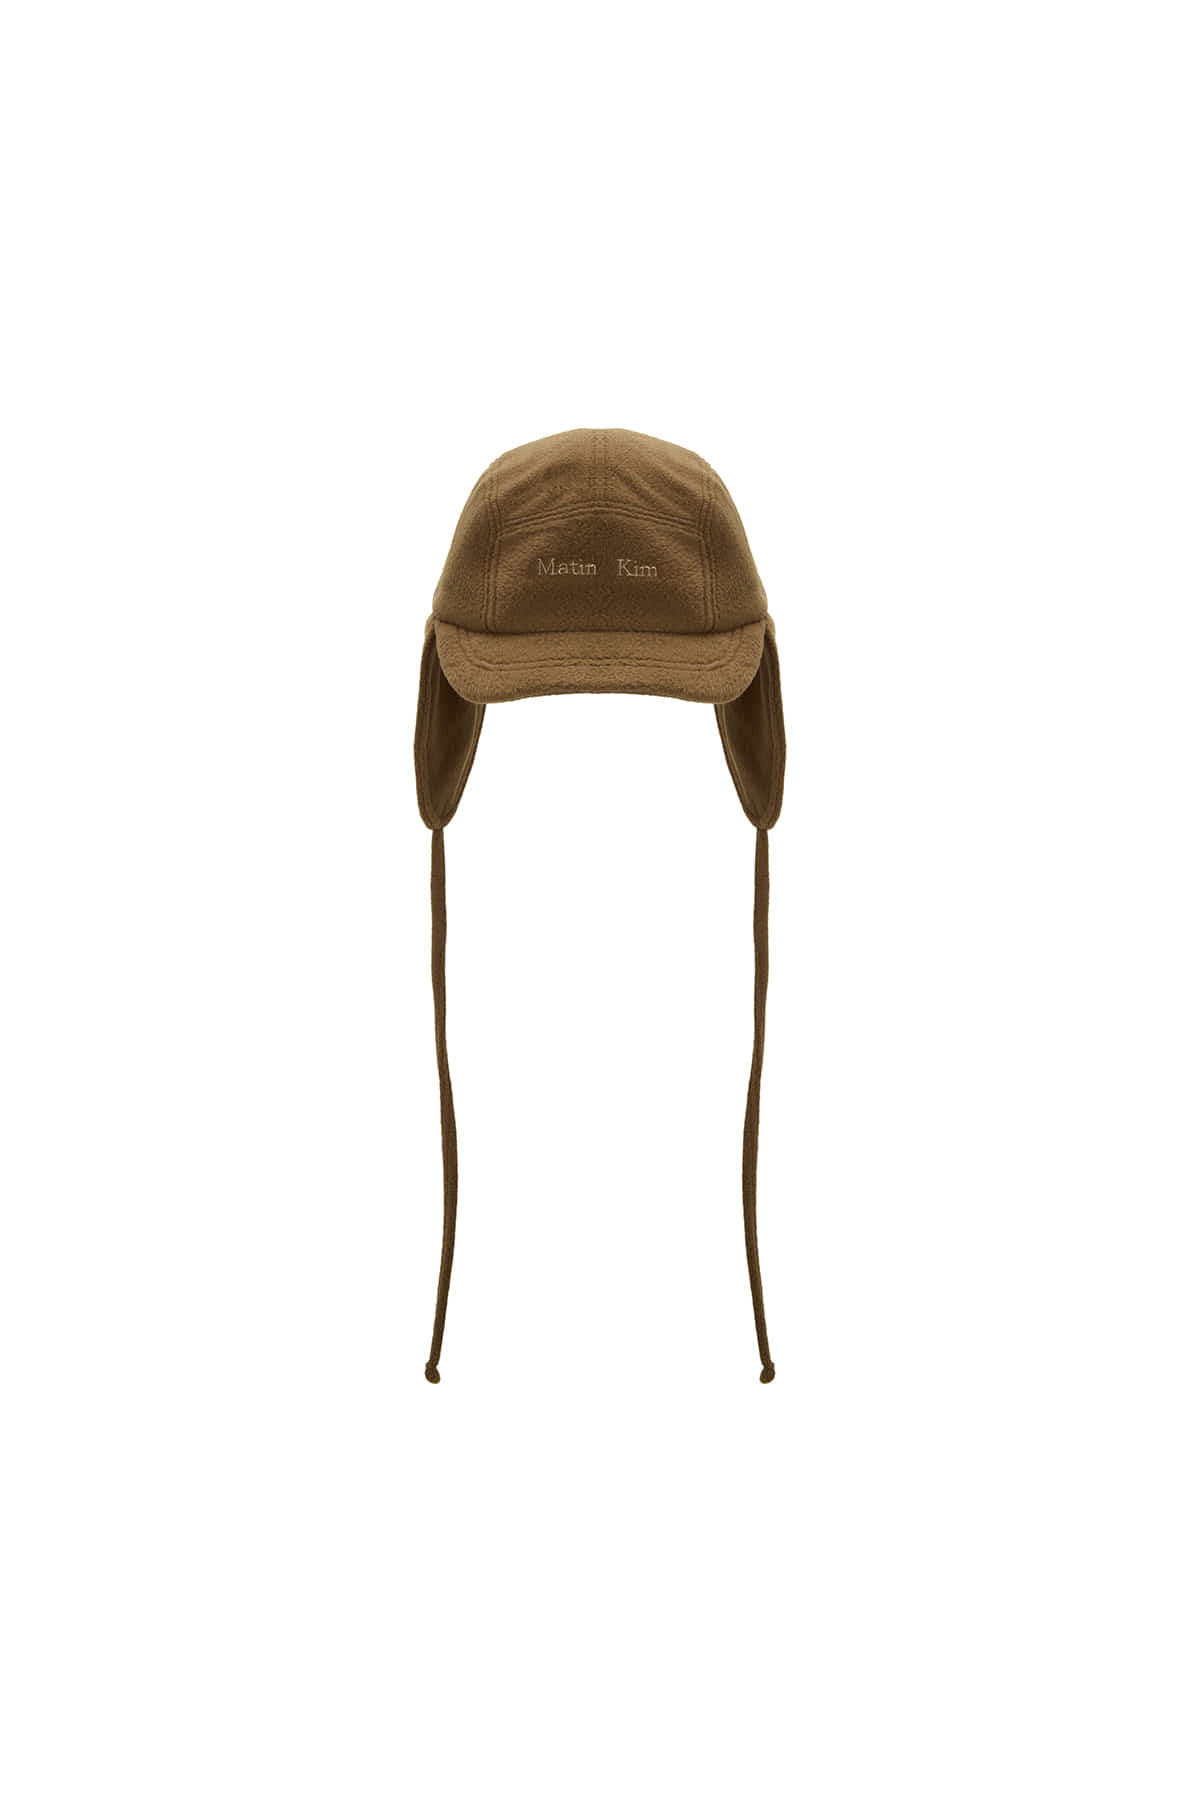 MATIN FLEECE SOLID TRAPPER HAT IN CAMEL